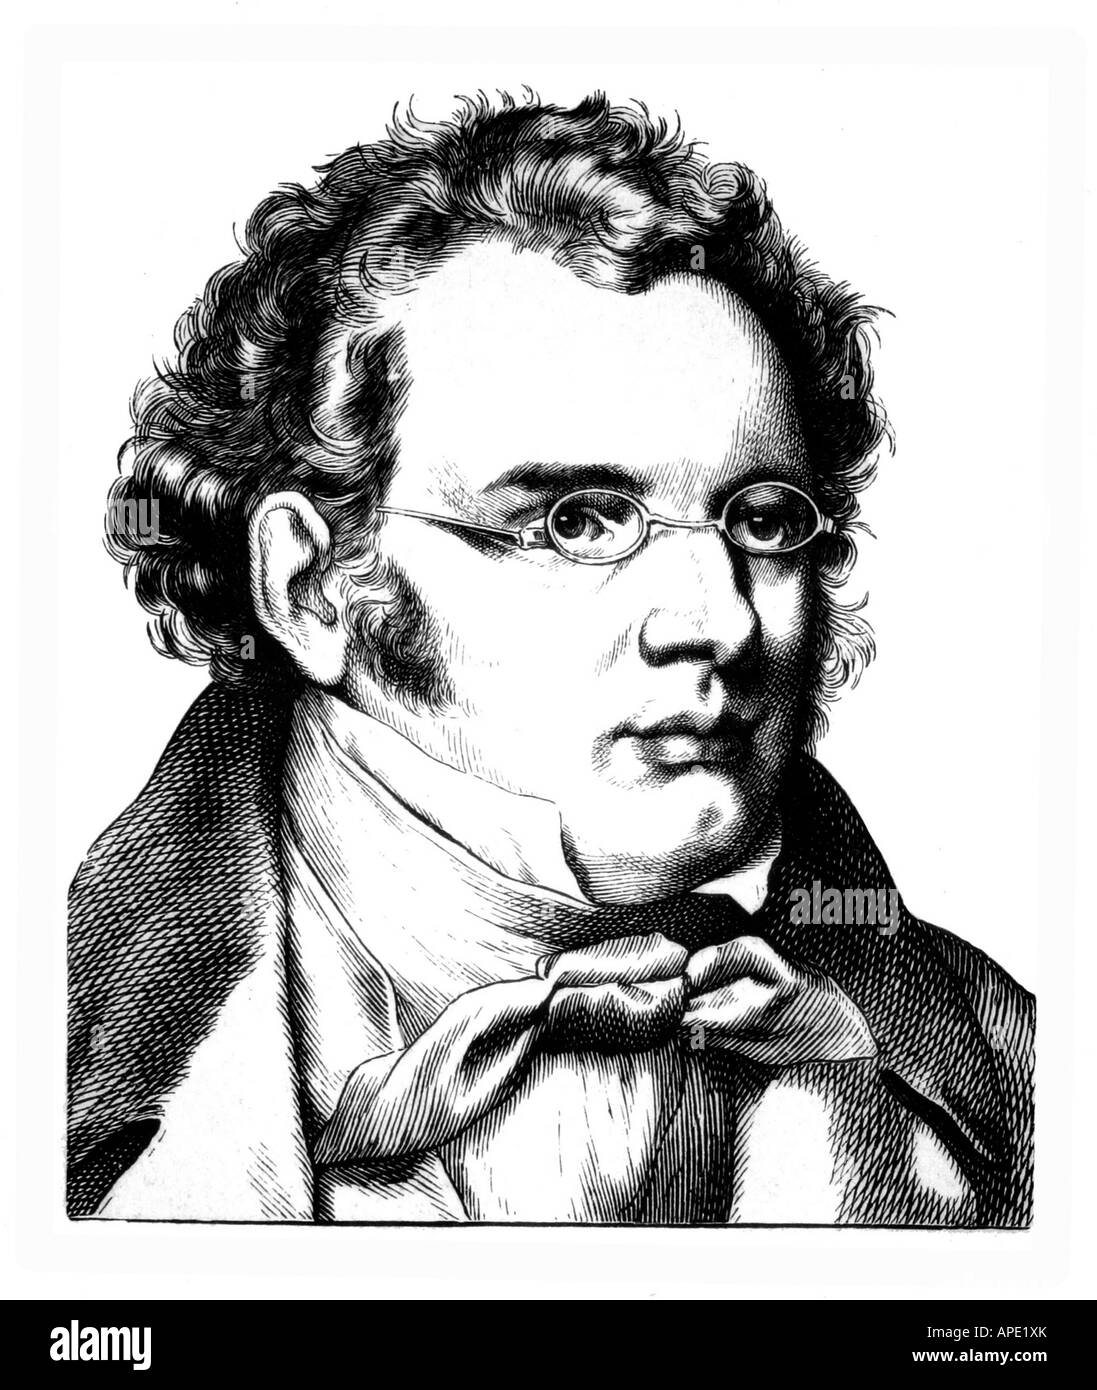 Schubert, Franz, 31.1.1797 - 19.11.1828, Austrian composer, portrait, steel engraving, 19th century, , Artist's Copyright has not to be cleared Stock Photo